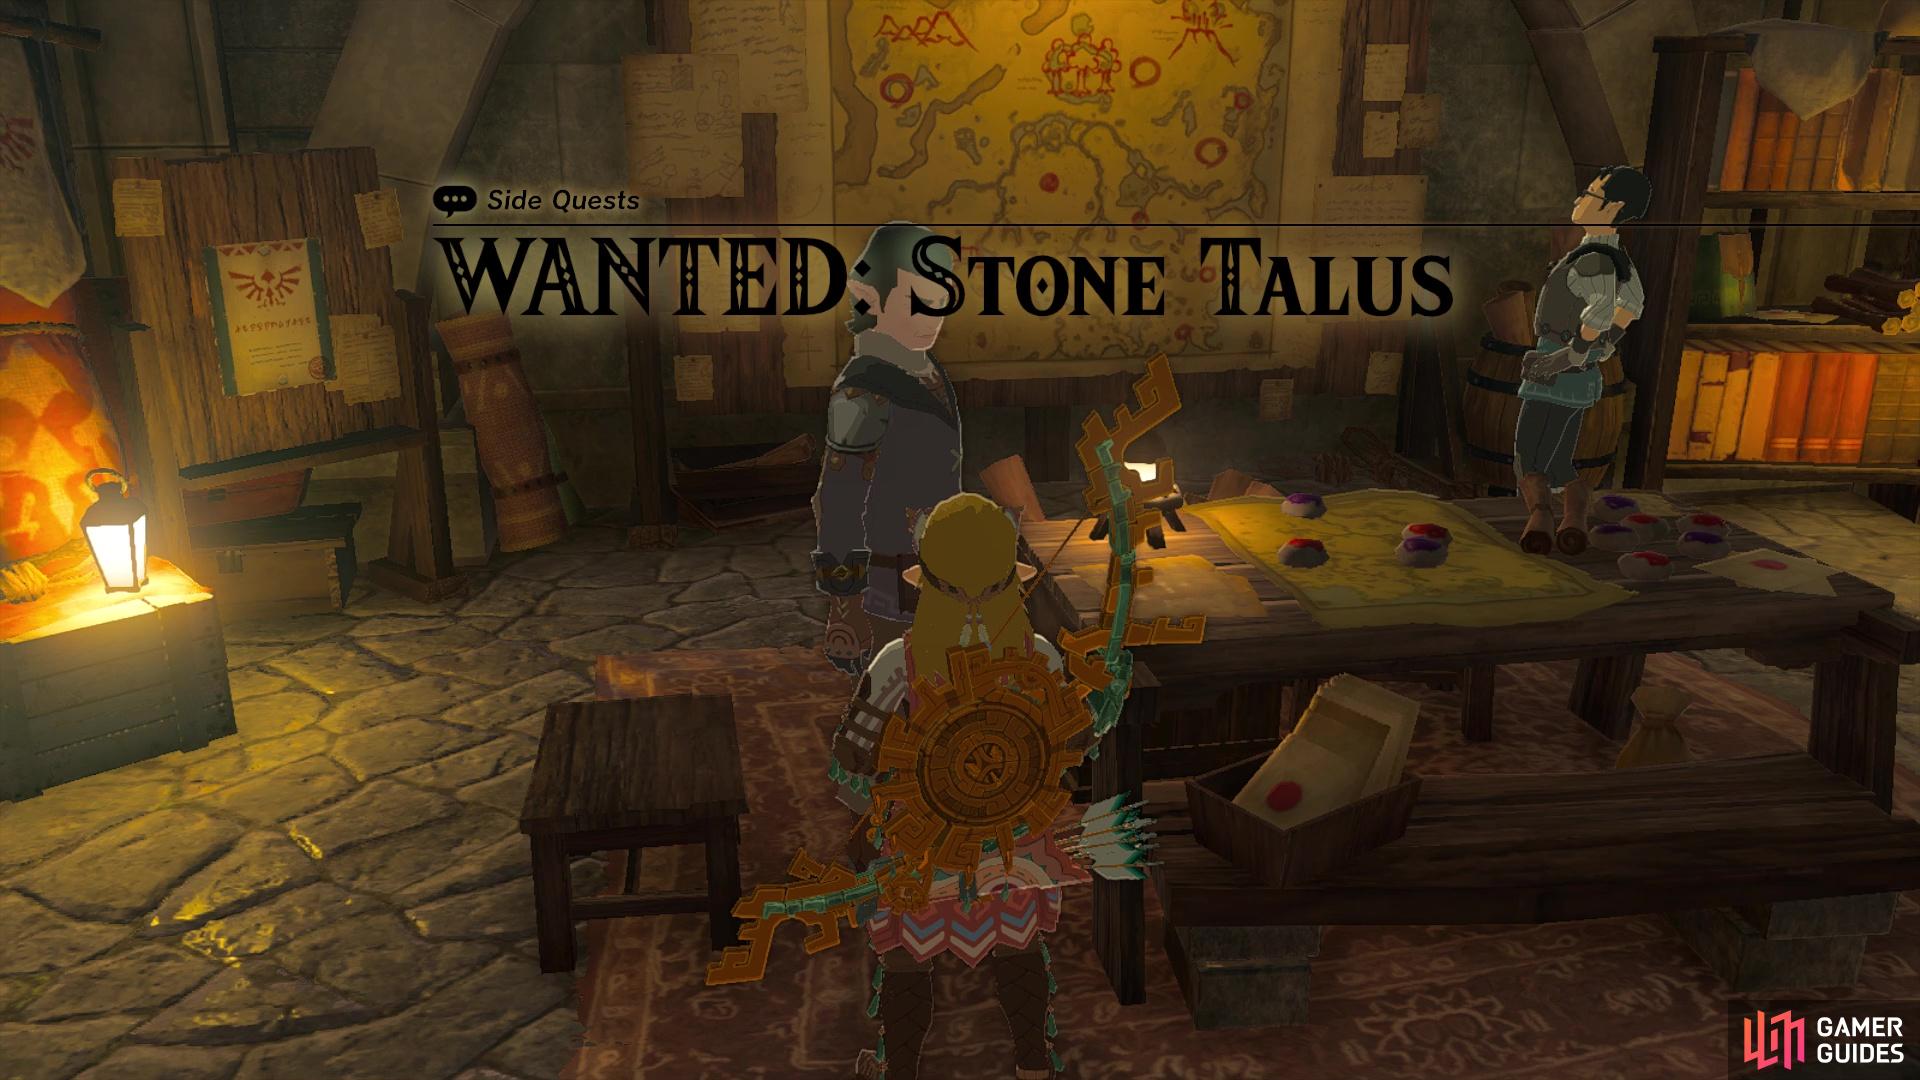 Wanted: Stone Talus is one of three quests you can get from Gralens, at the same time.